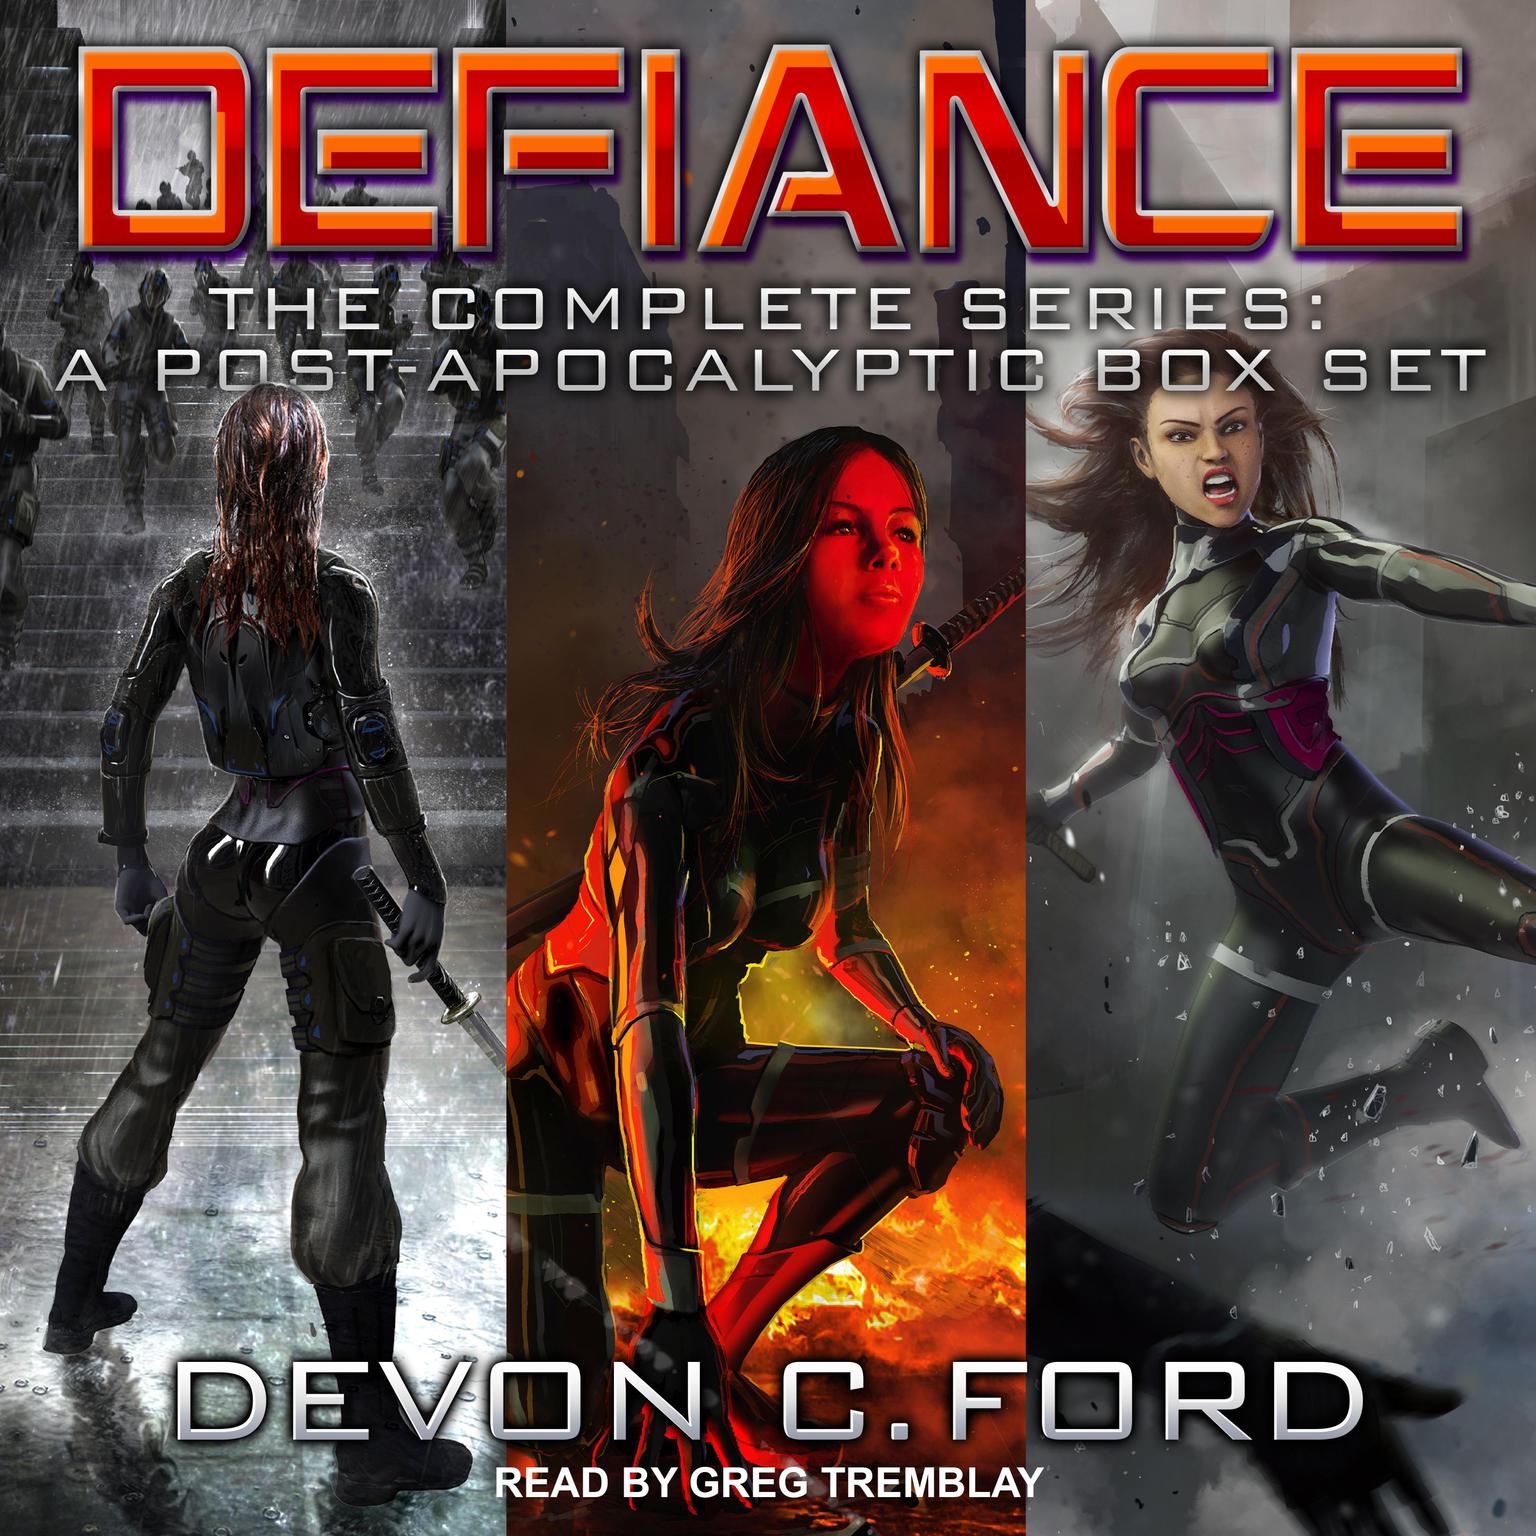 Defiance: The Complete Series: A Post-Apocalyptic Box Set Audiobook, by Devon C. Ford